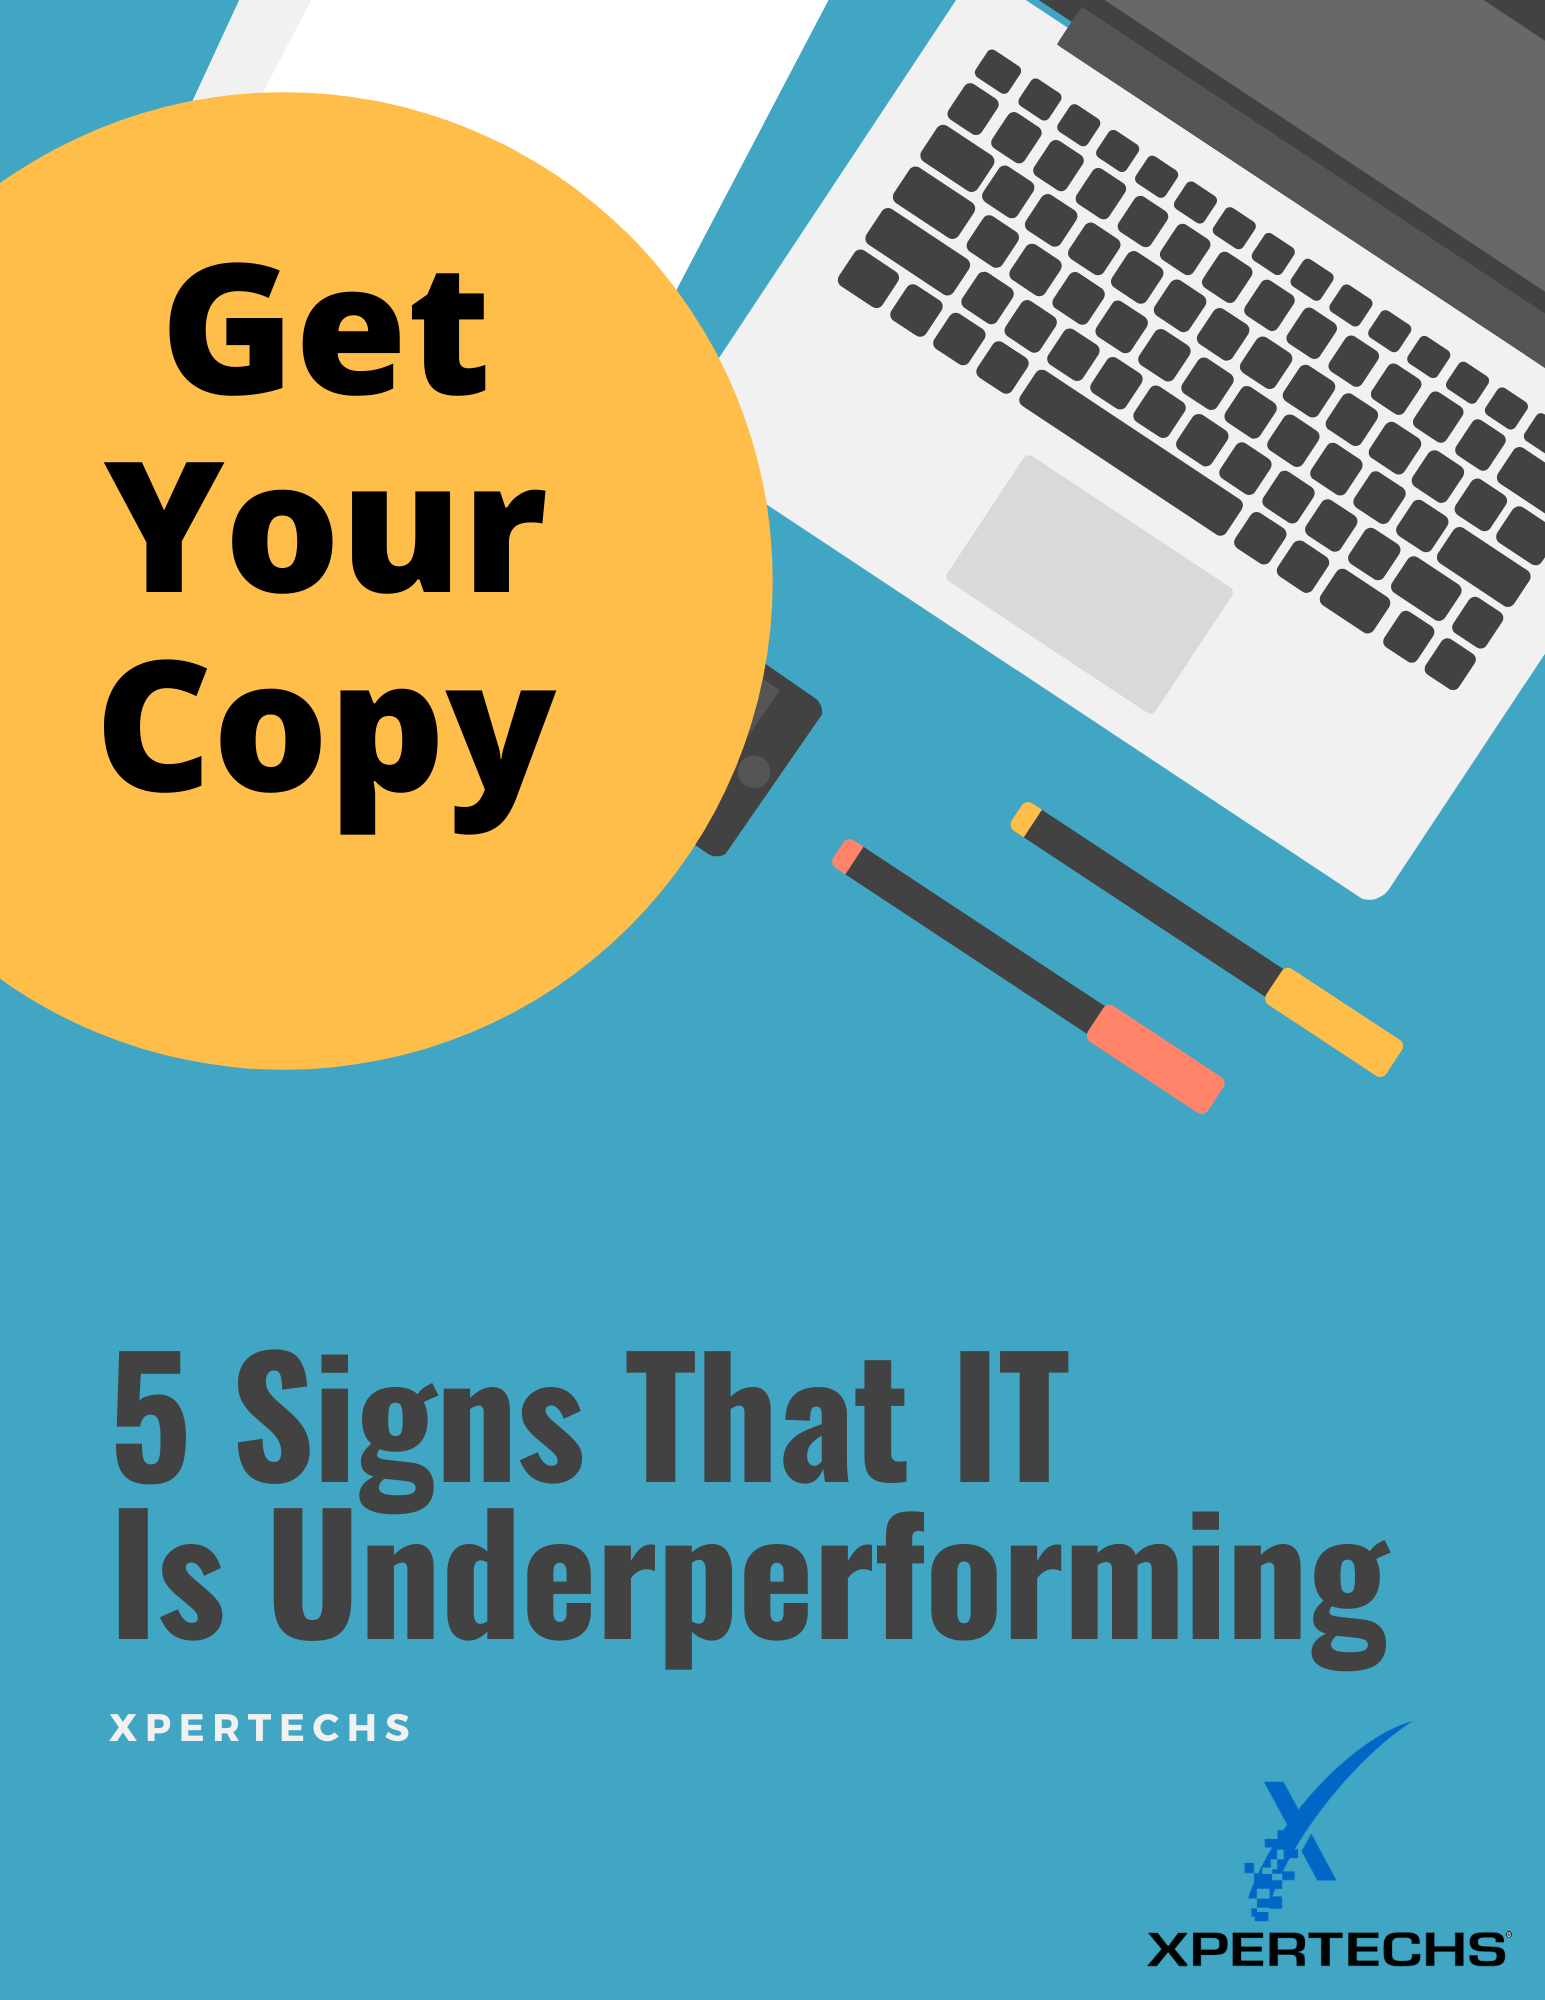 Get Your Copy of 5 Signs That IT Is Underperforming